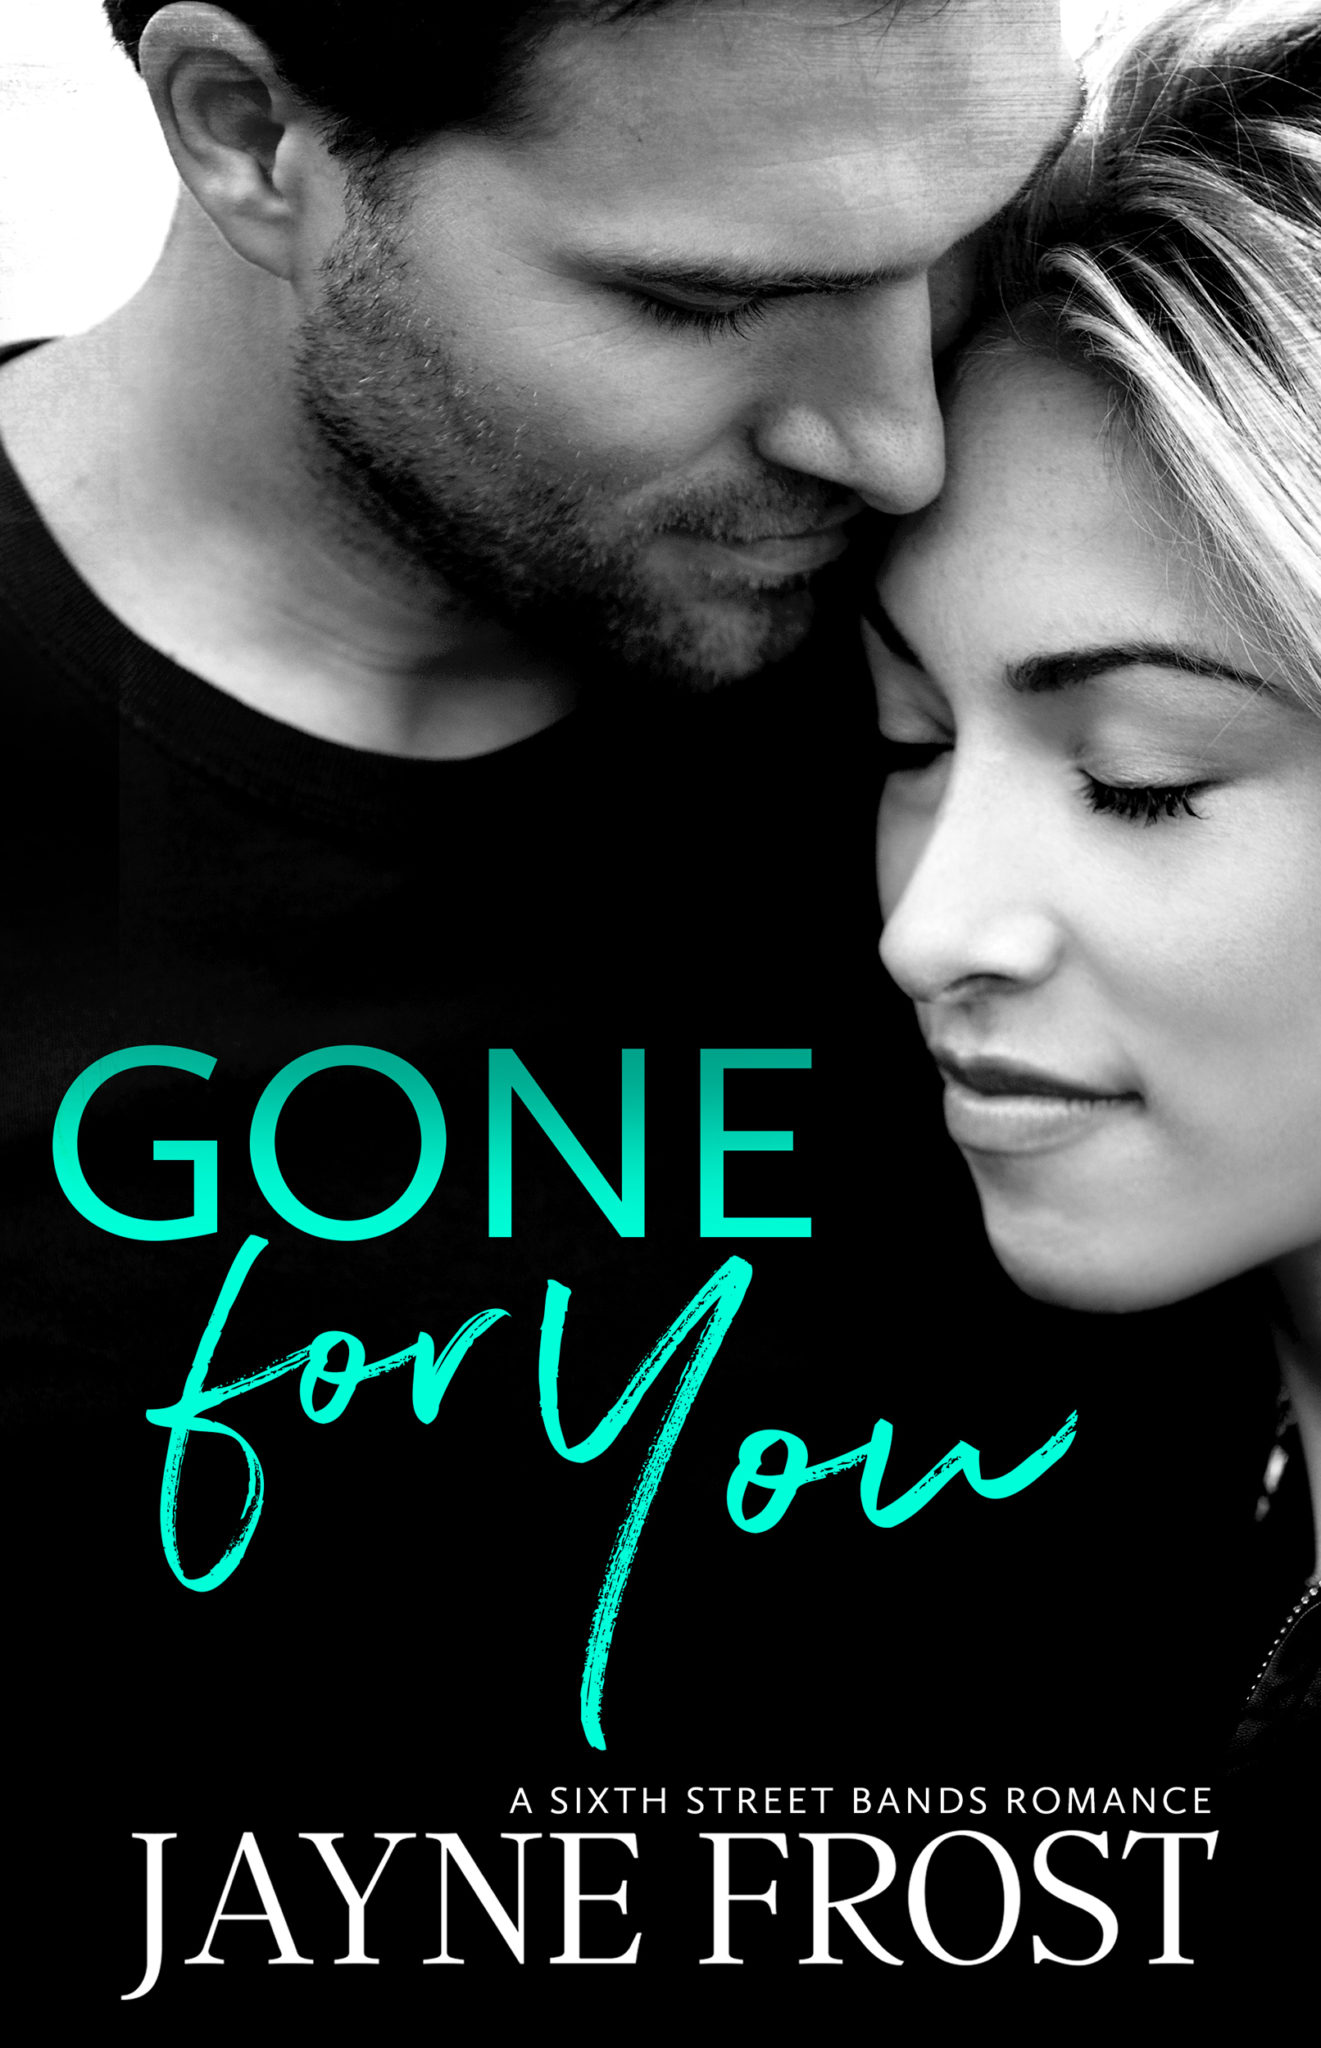 FREE: Gone for You by Jane Frost